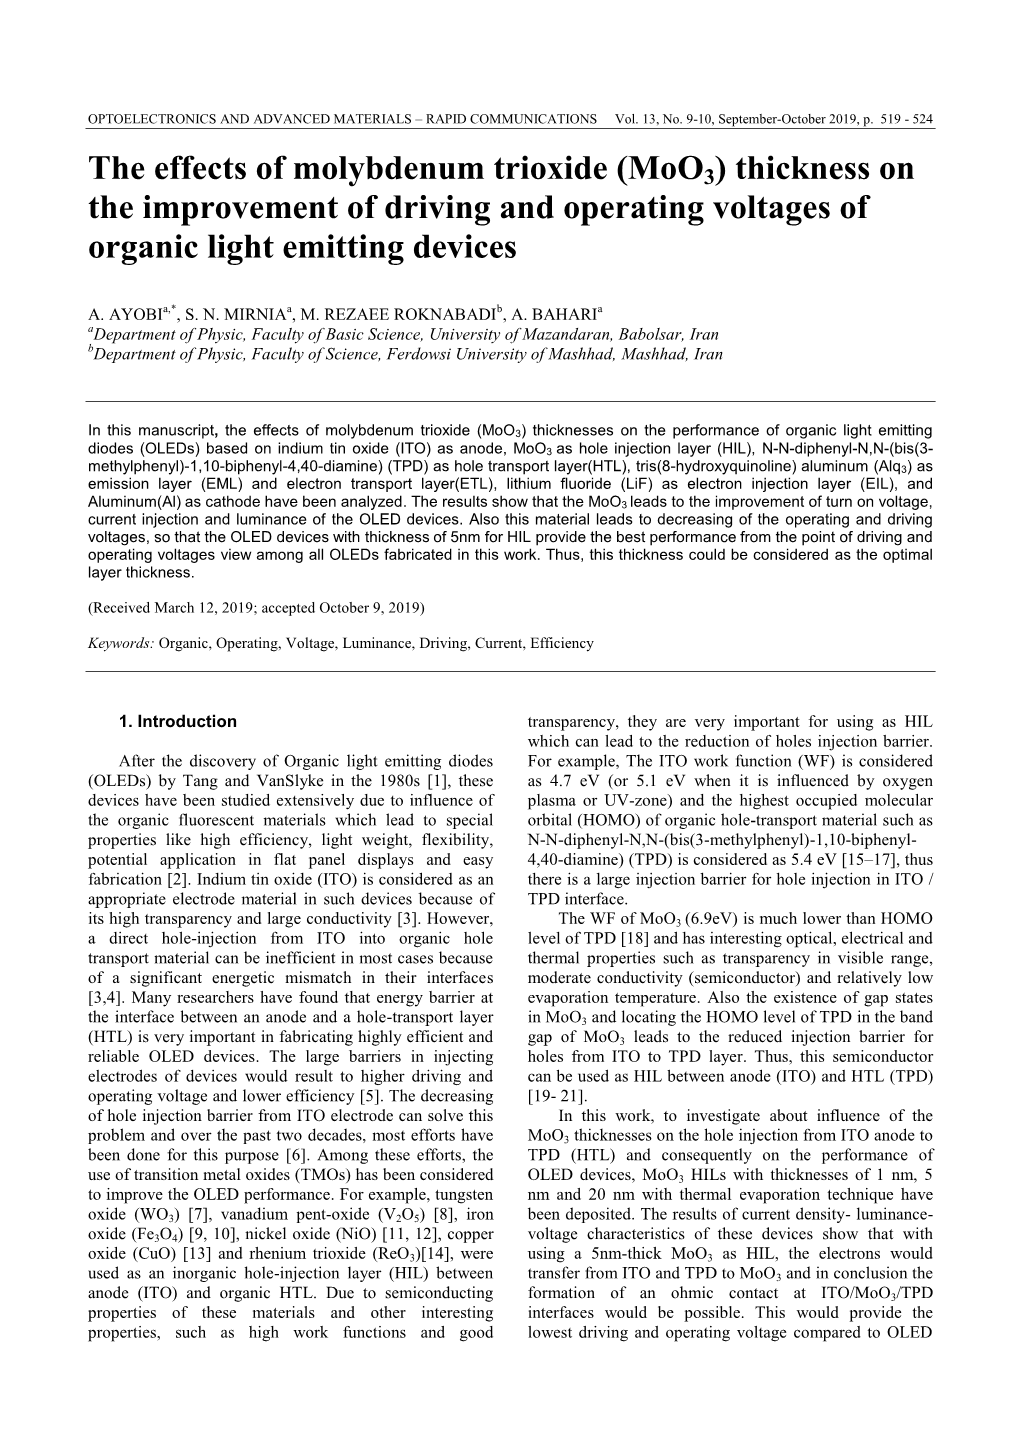 (Moo3) Thickness on the Improvement of Driving and Operating Voltages of Organic Light Emitting Devices